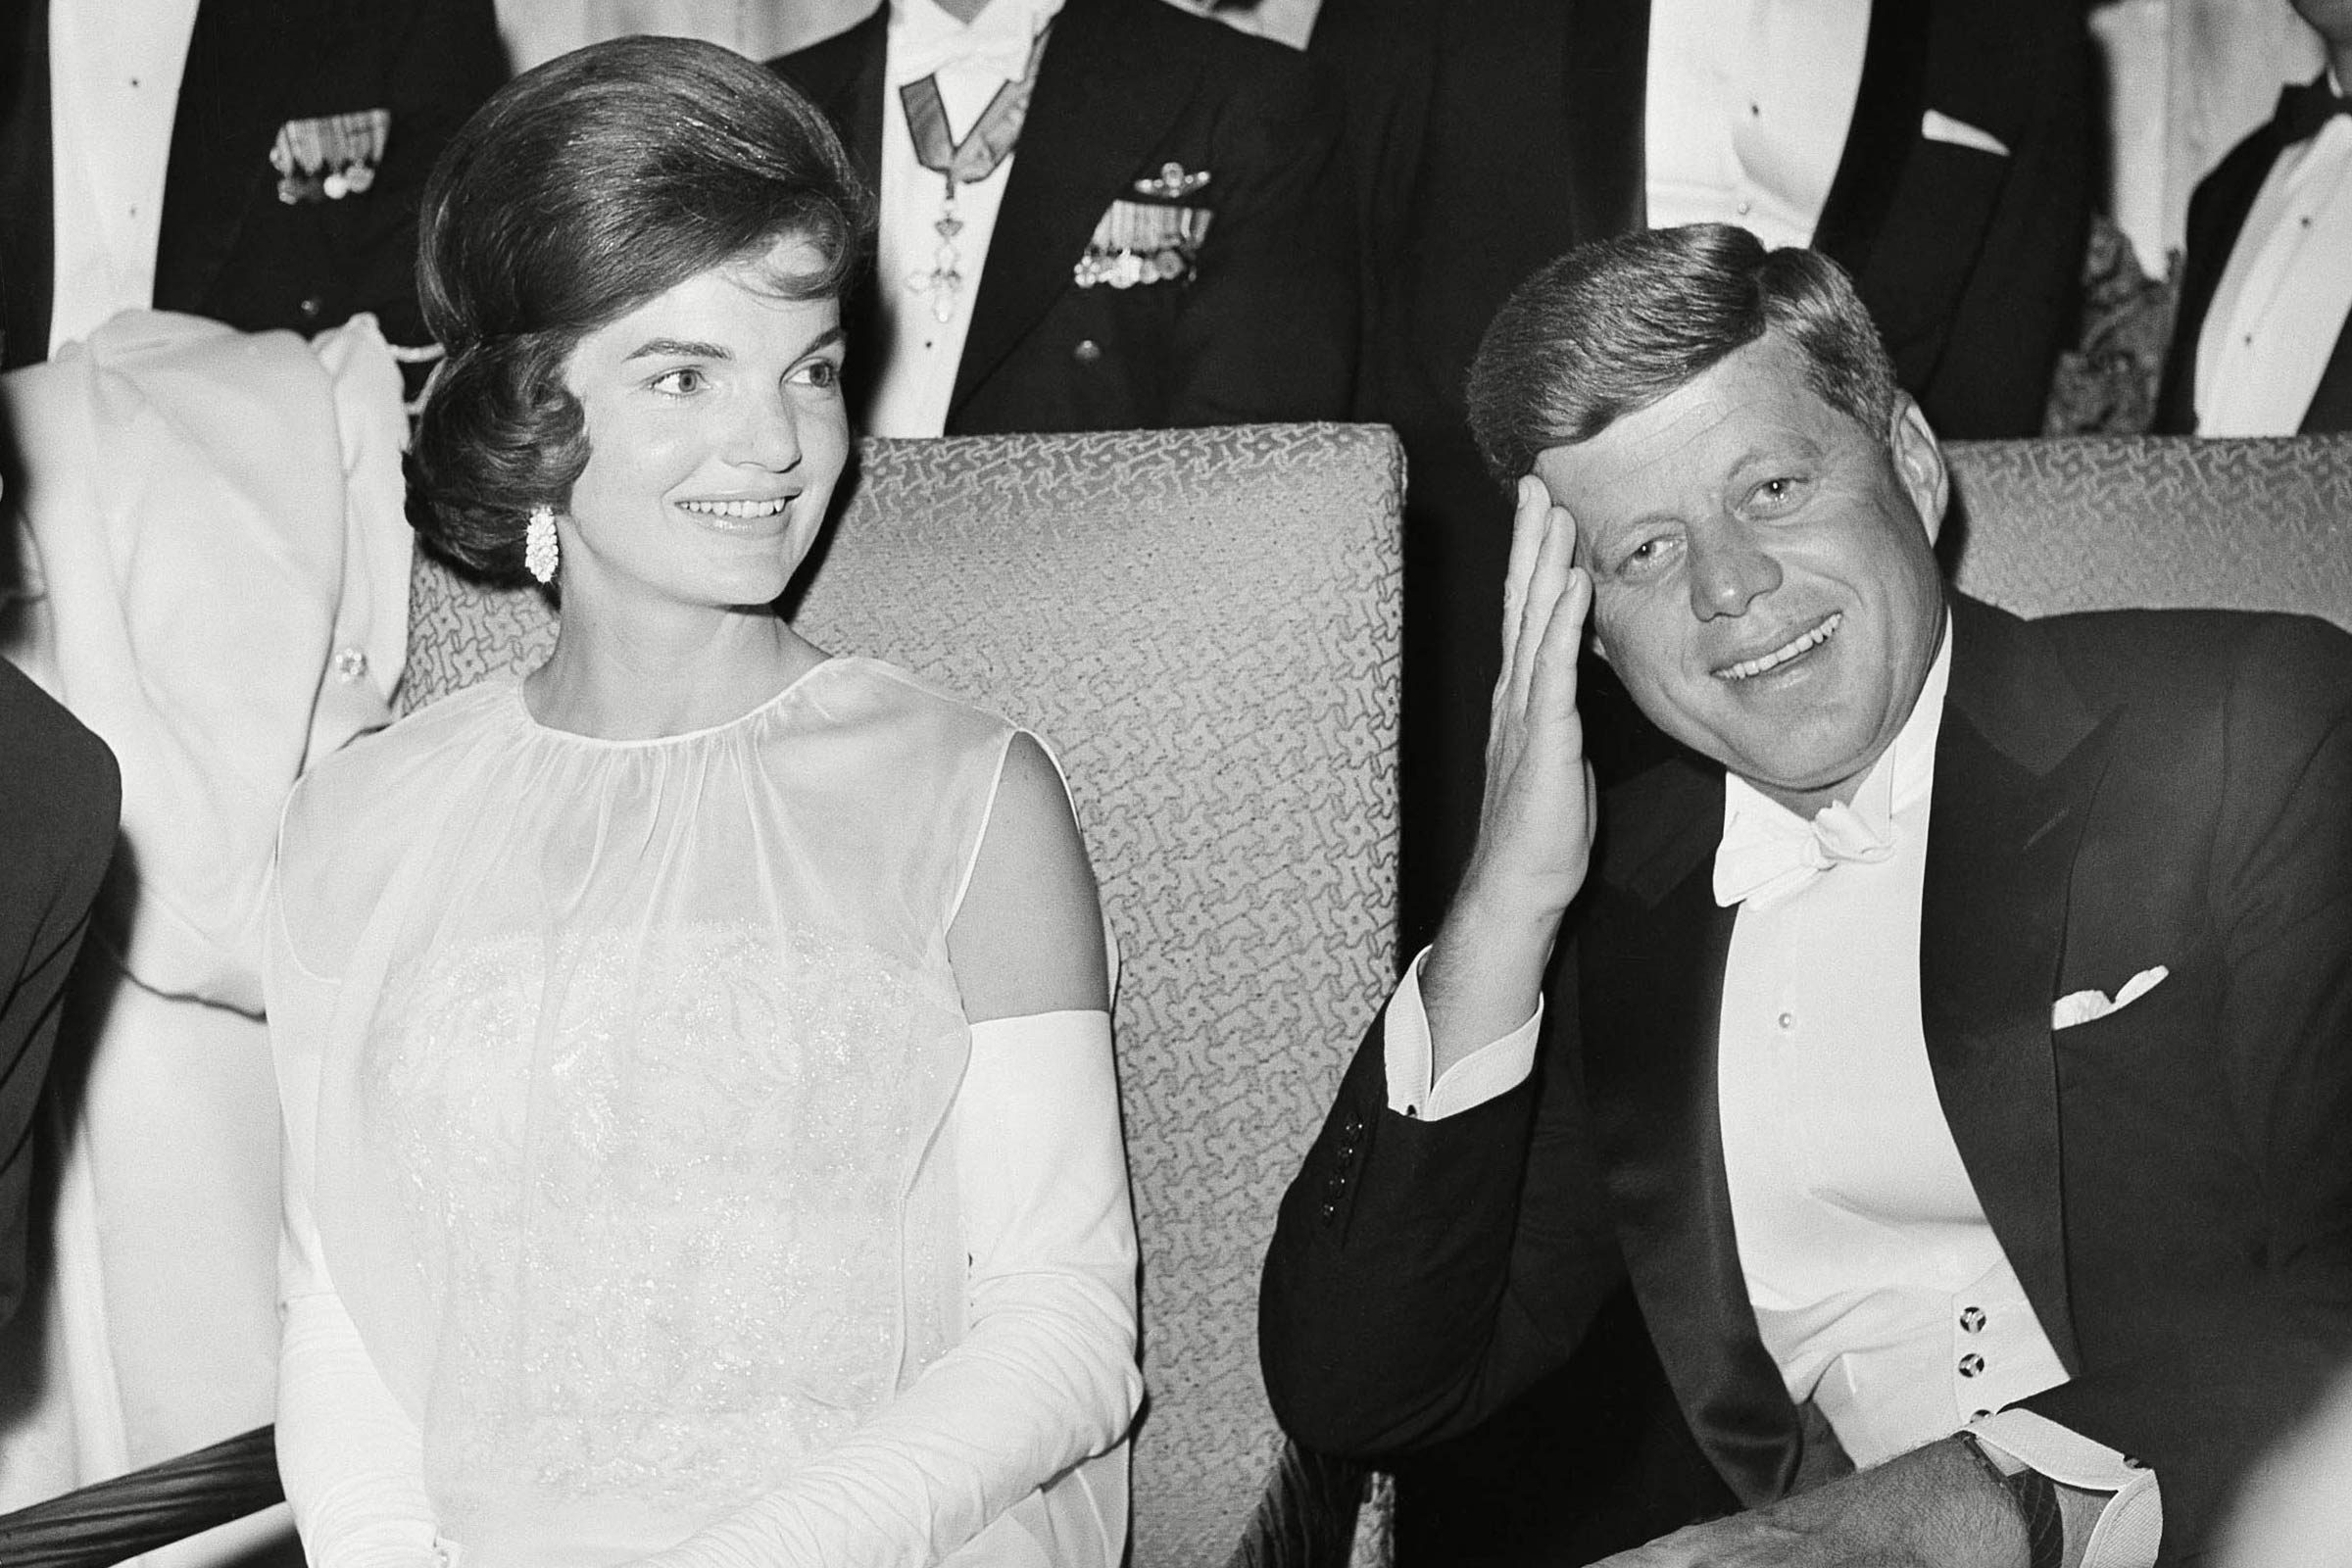 10-15-rarely-seen-photos-of-jfk-and-jackie-kennedy-6008002a-Uncredited-AP-REX-SHUTTERSTOCK